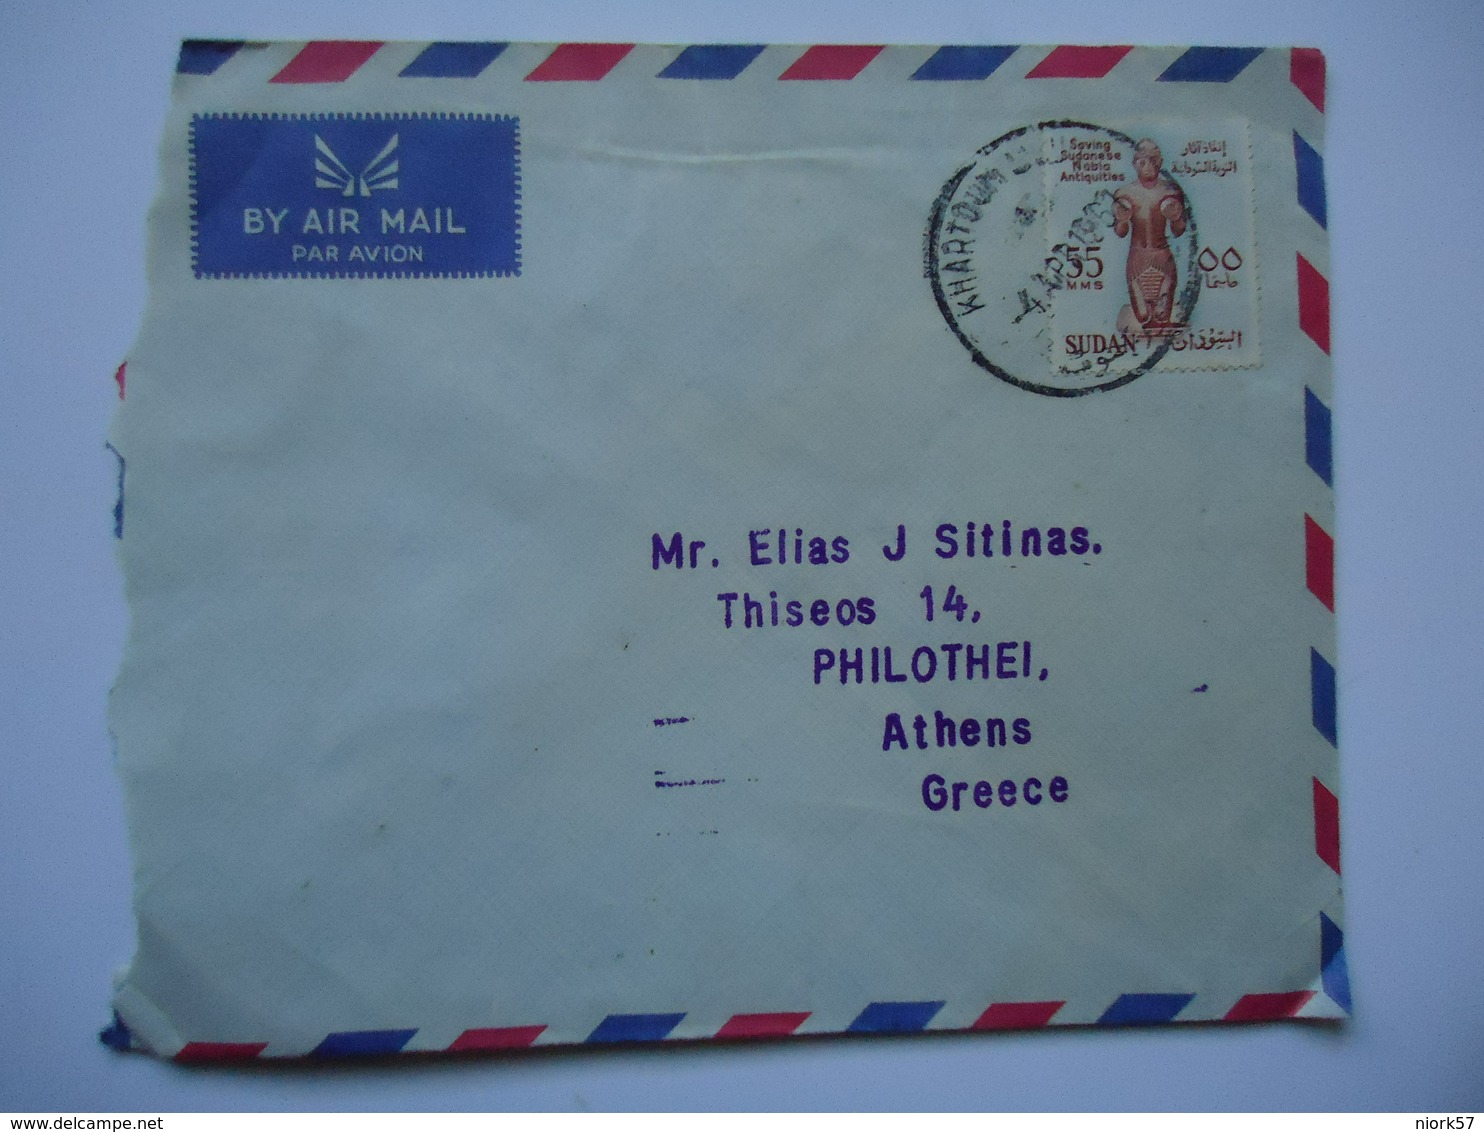 GREECE    COVER SUDAN  1961  WITH POSTMARK  XALADRION CHALADRION - Flammes & Oblitérations